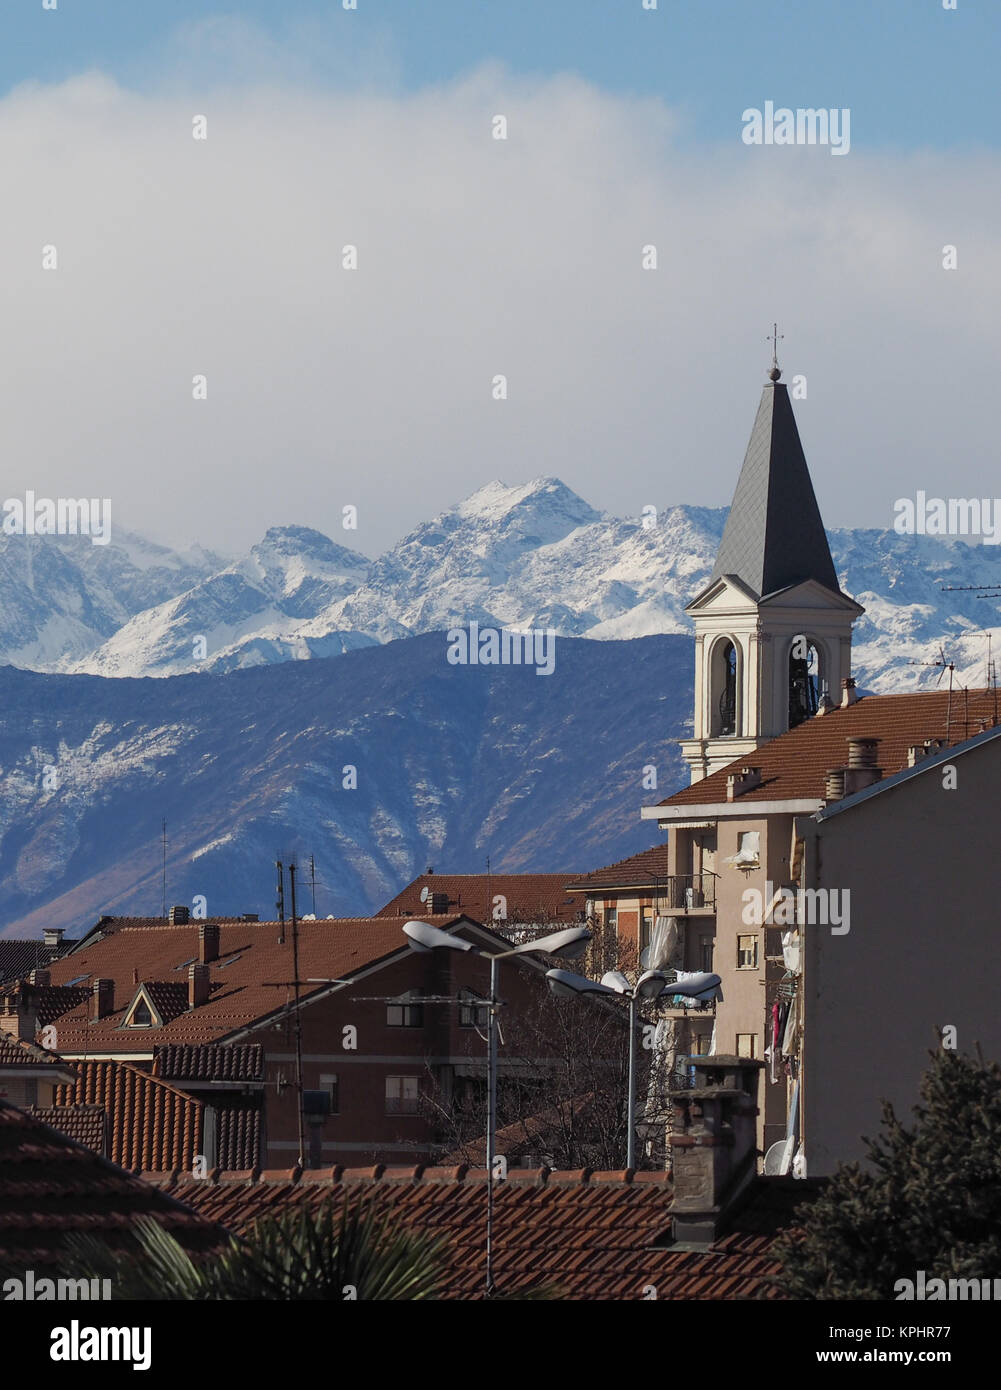 View of the city of Settimo Torinese, Italy with steeple of St Peter in Chains church and the Alps mountains Stock Photo